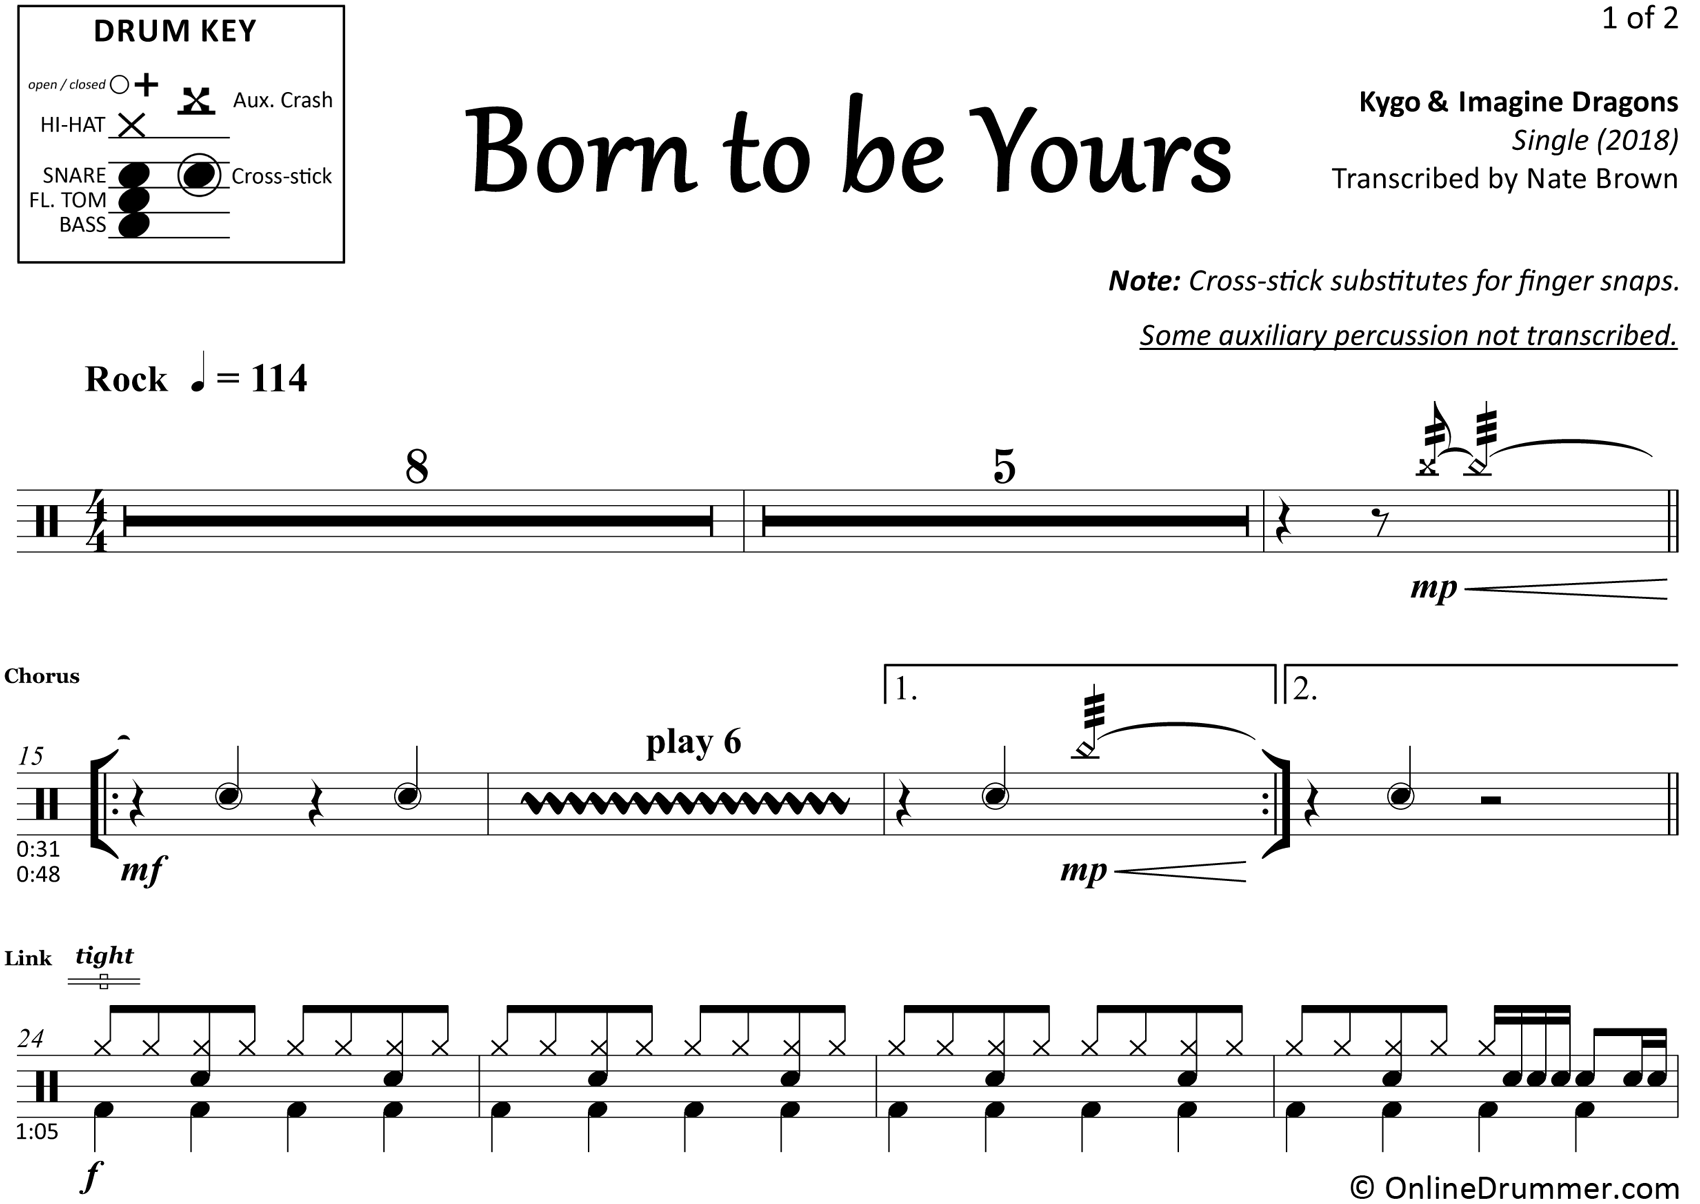 Born to be Yours - Kygo & Imagine Dragons - Drum Sheet Music